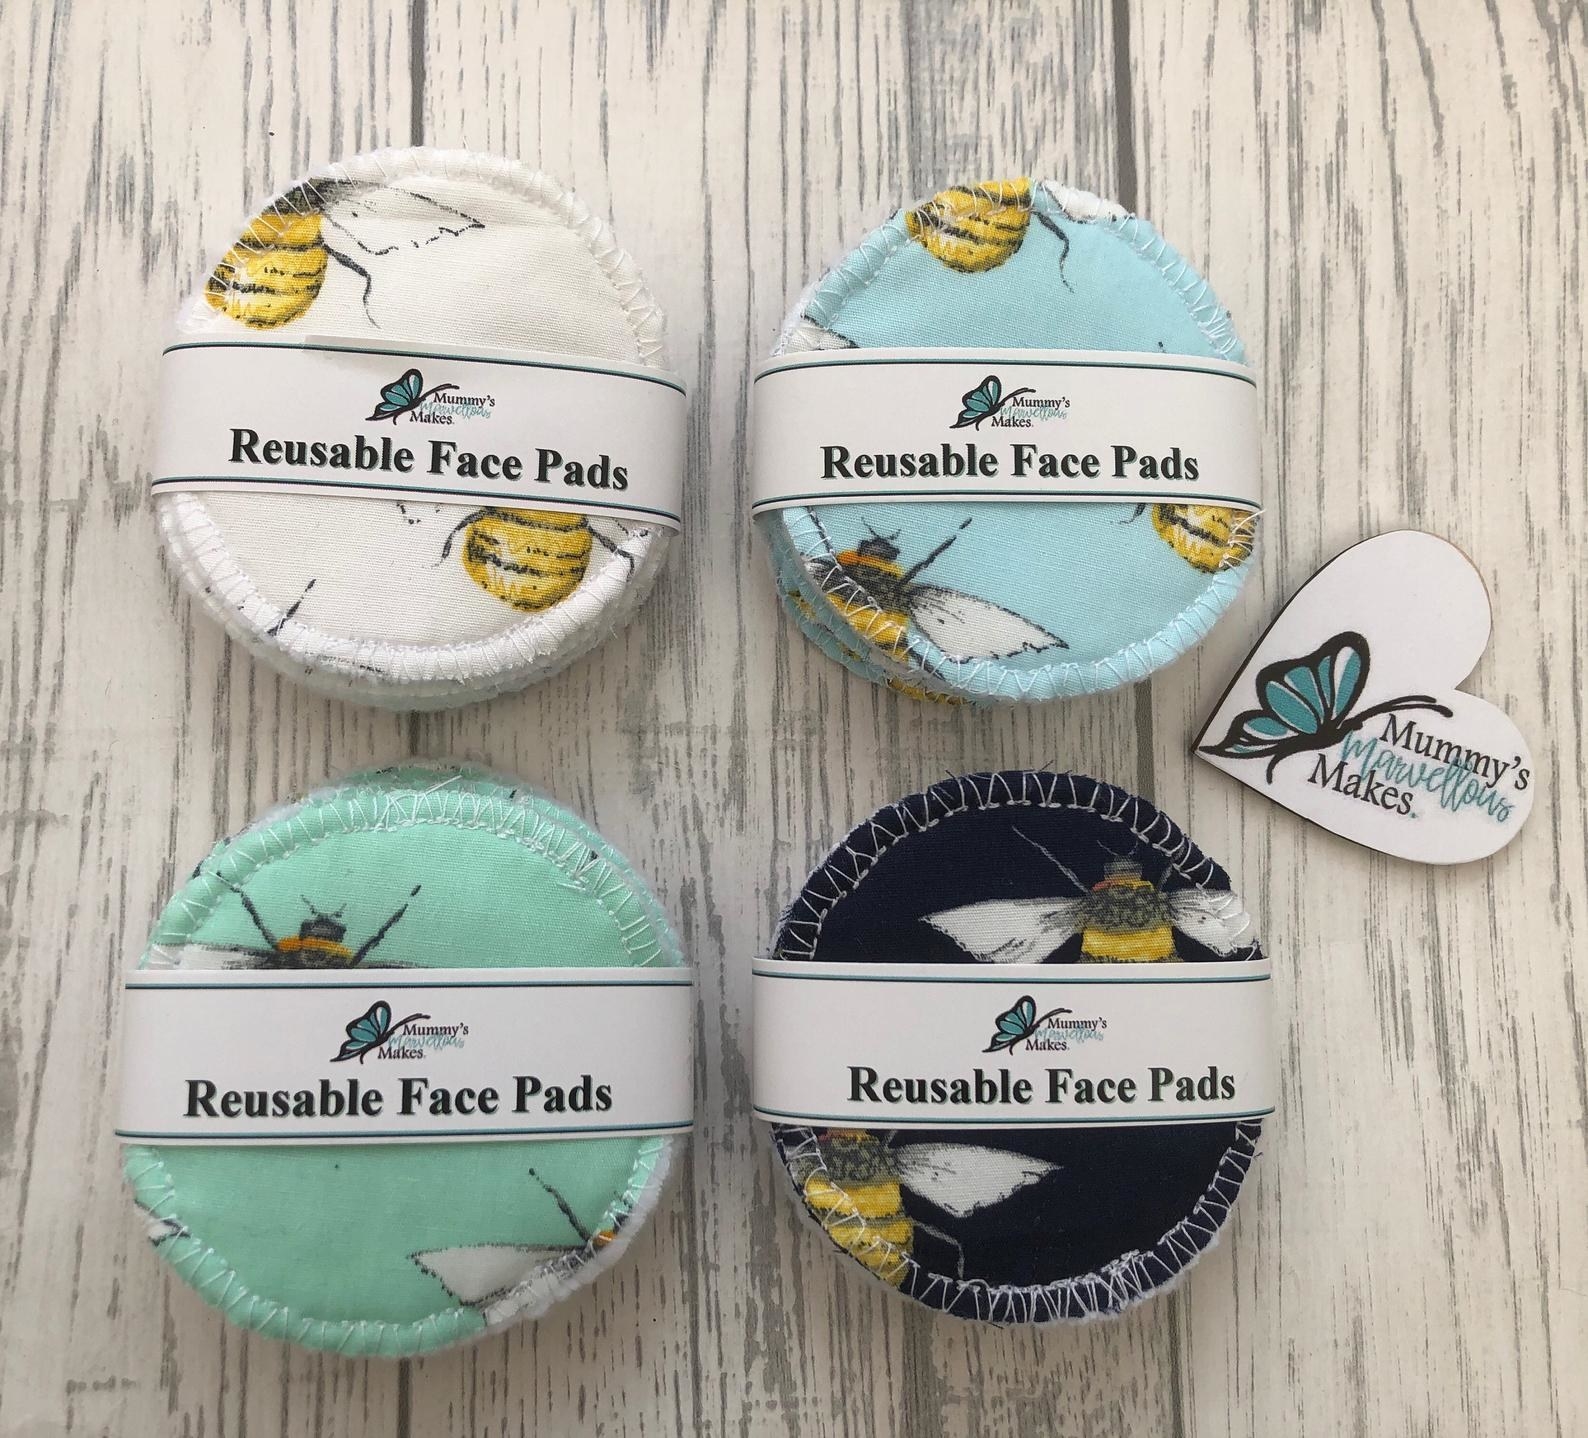 four-packs of resuable face pads in white, blue, black, and teal fabric with bees on them